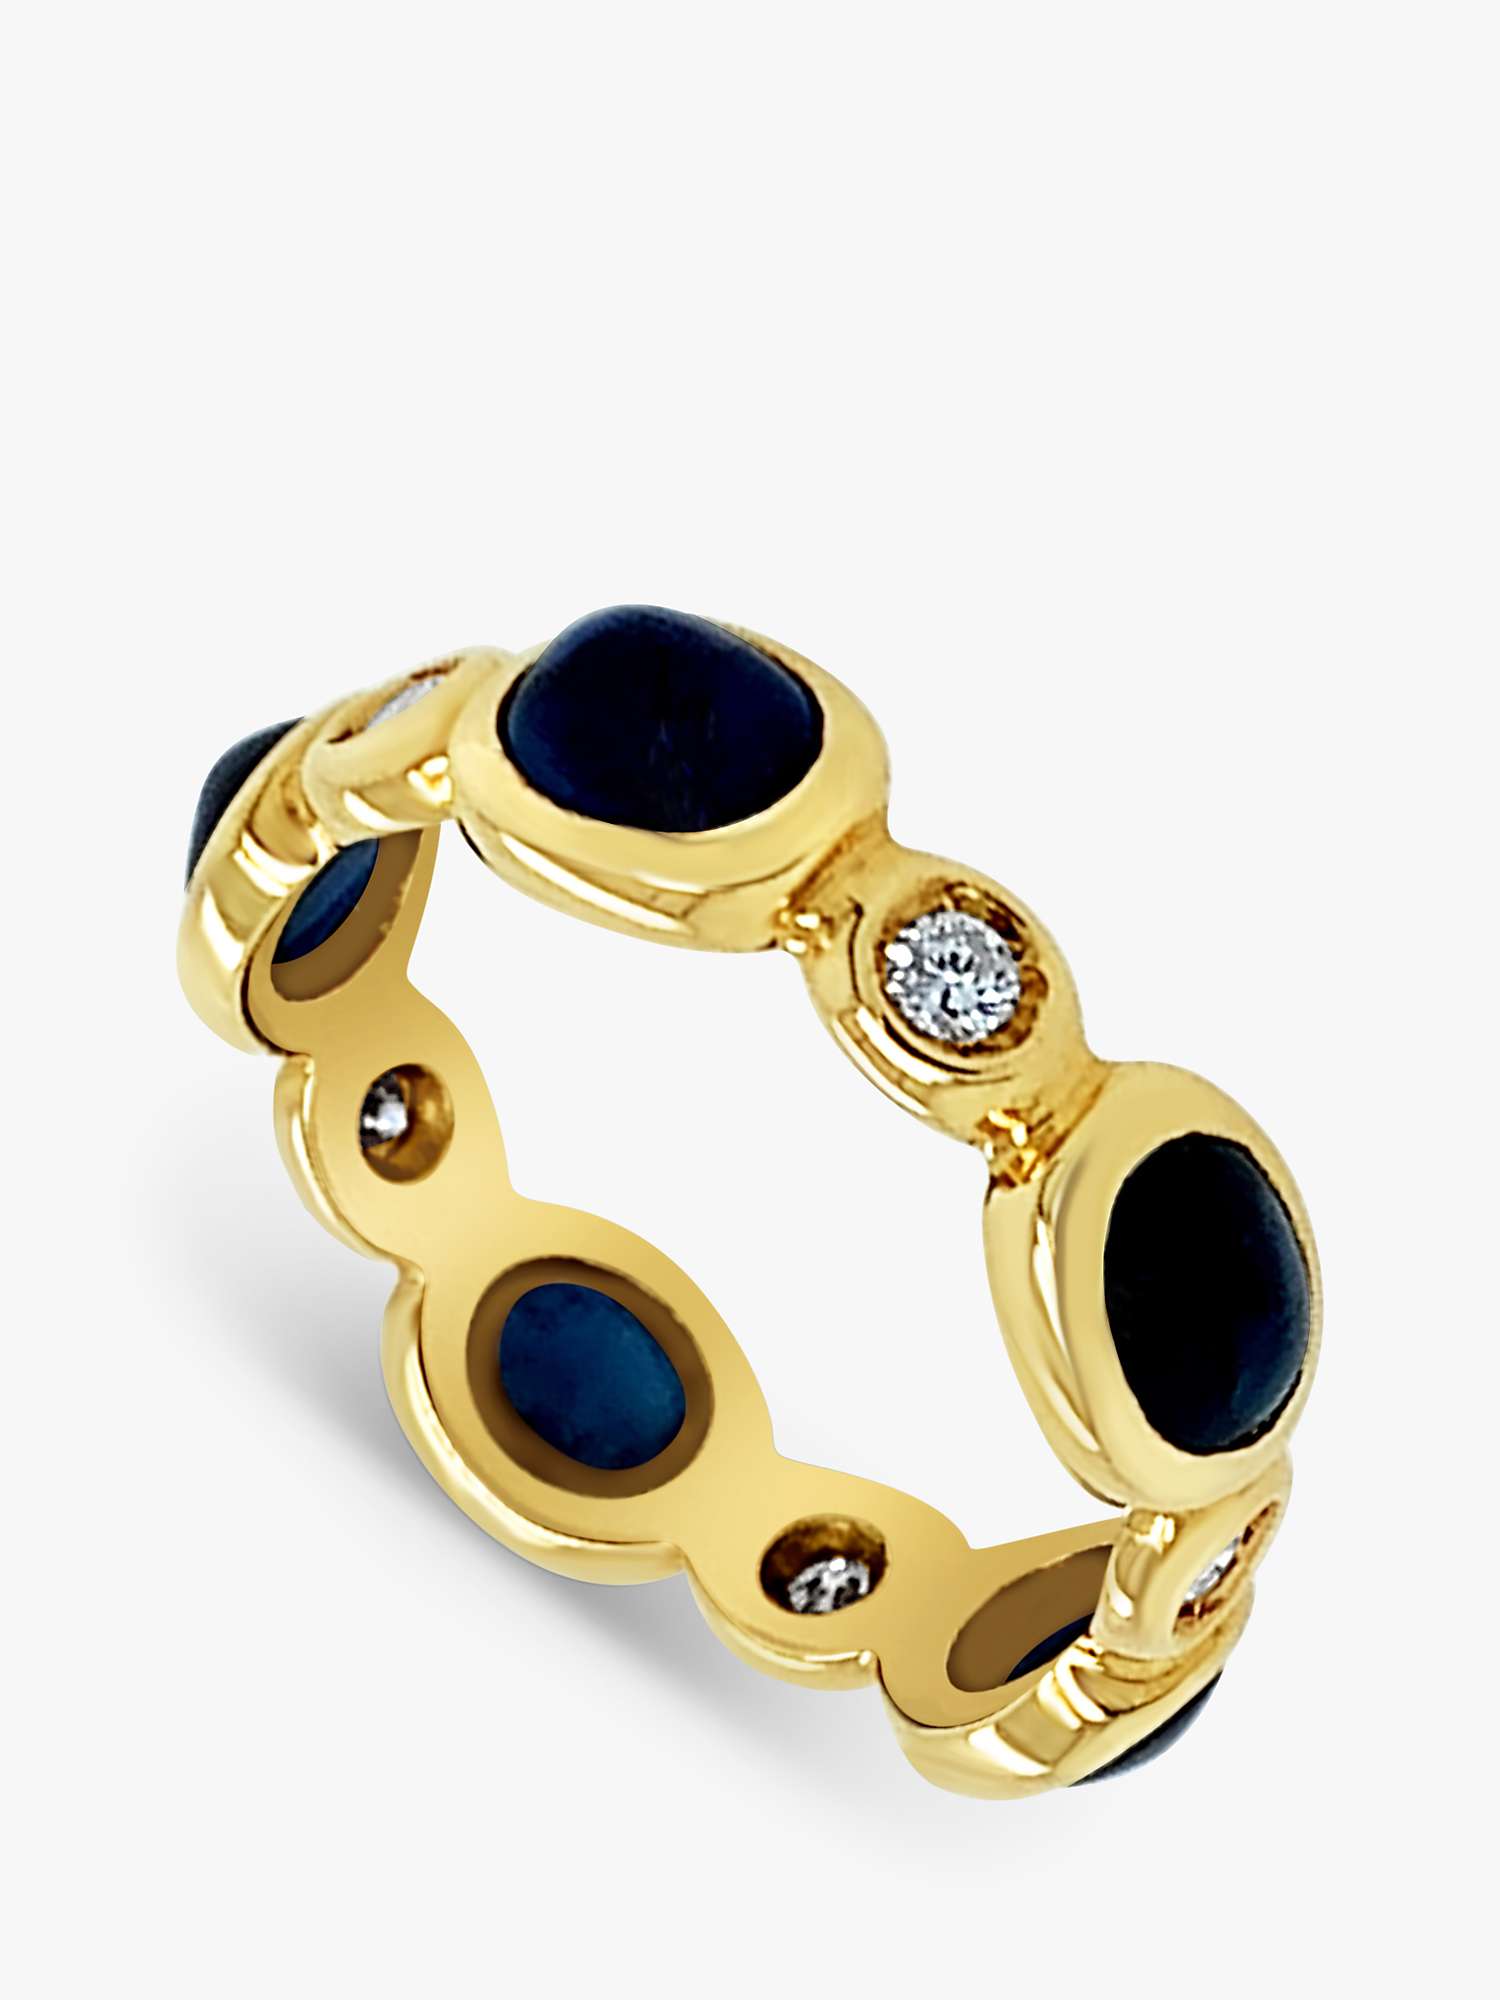 Buy Milton & Humble Jewellery 18ct Yellow Gold Second Hand Sapphire & Diamond Band Ring Online at johnlewis.com